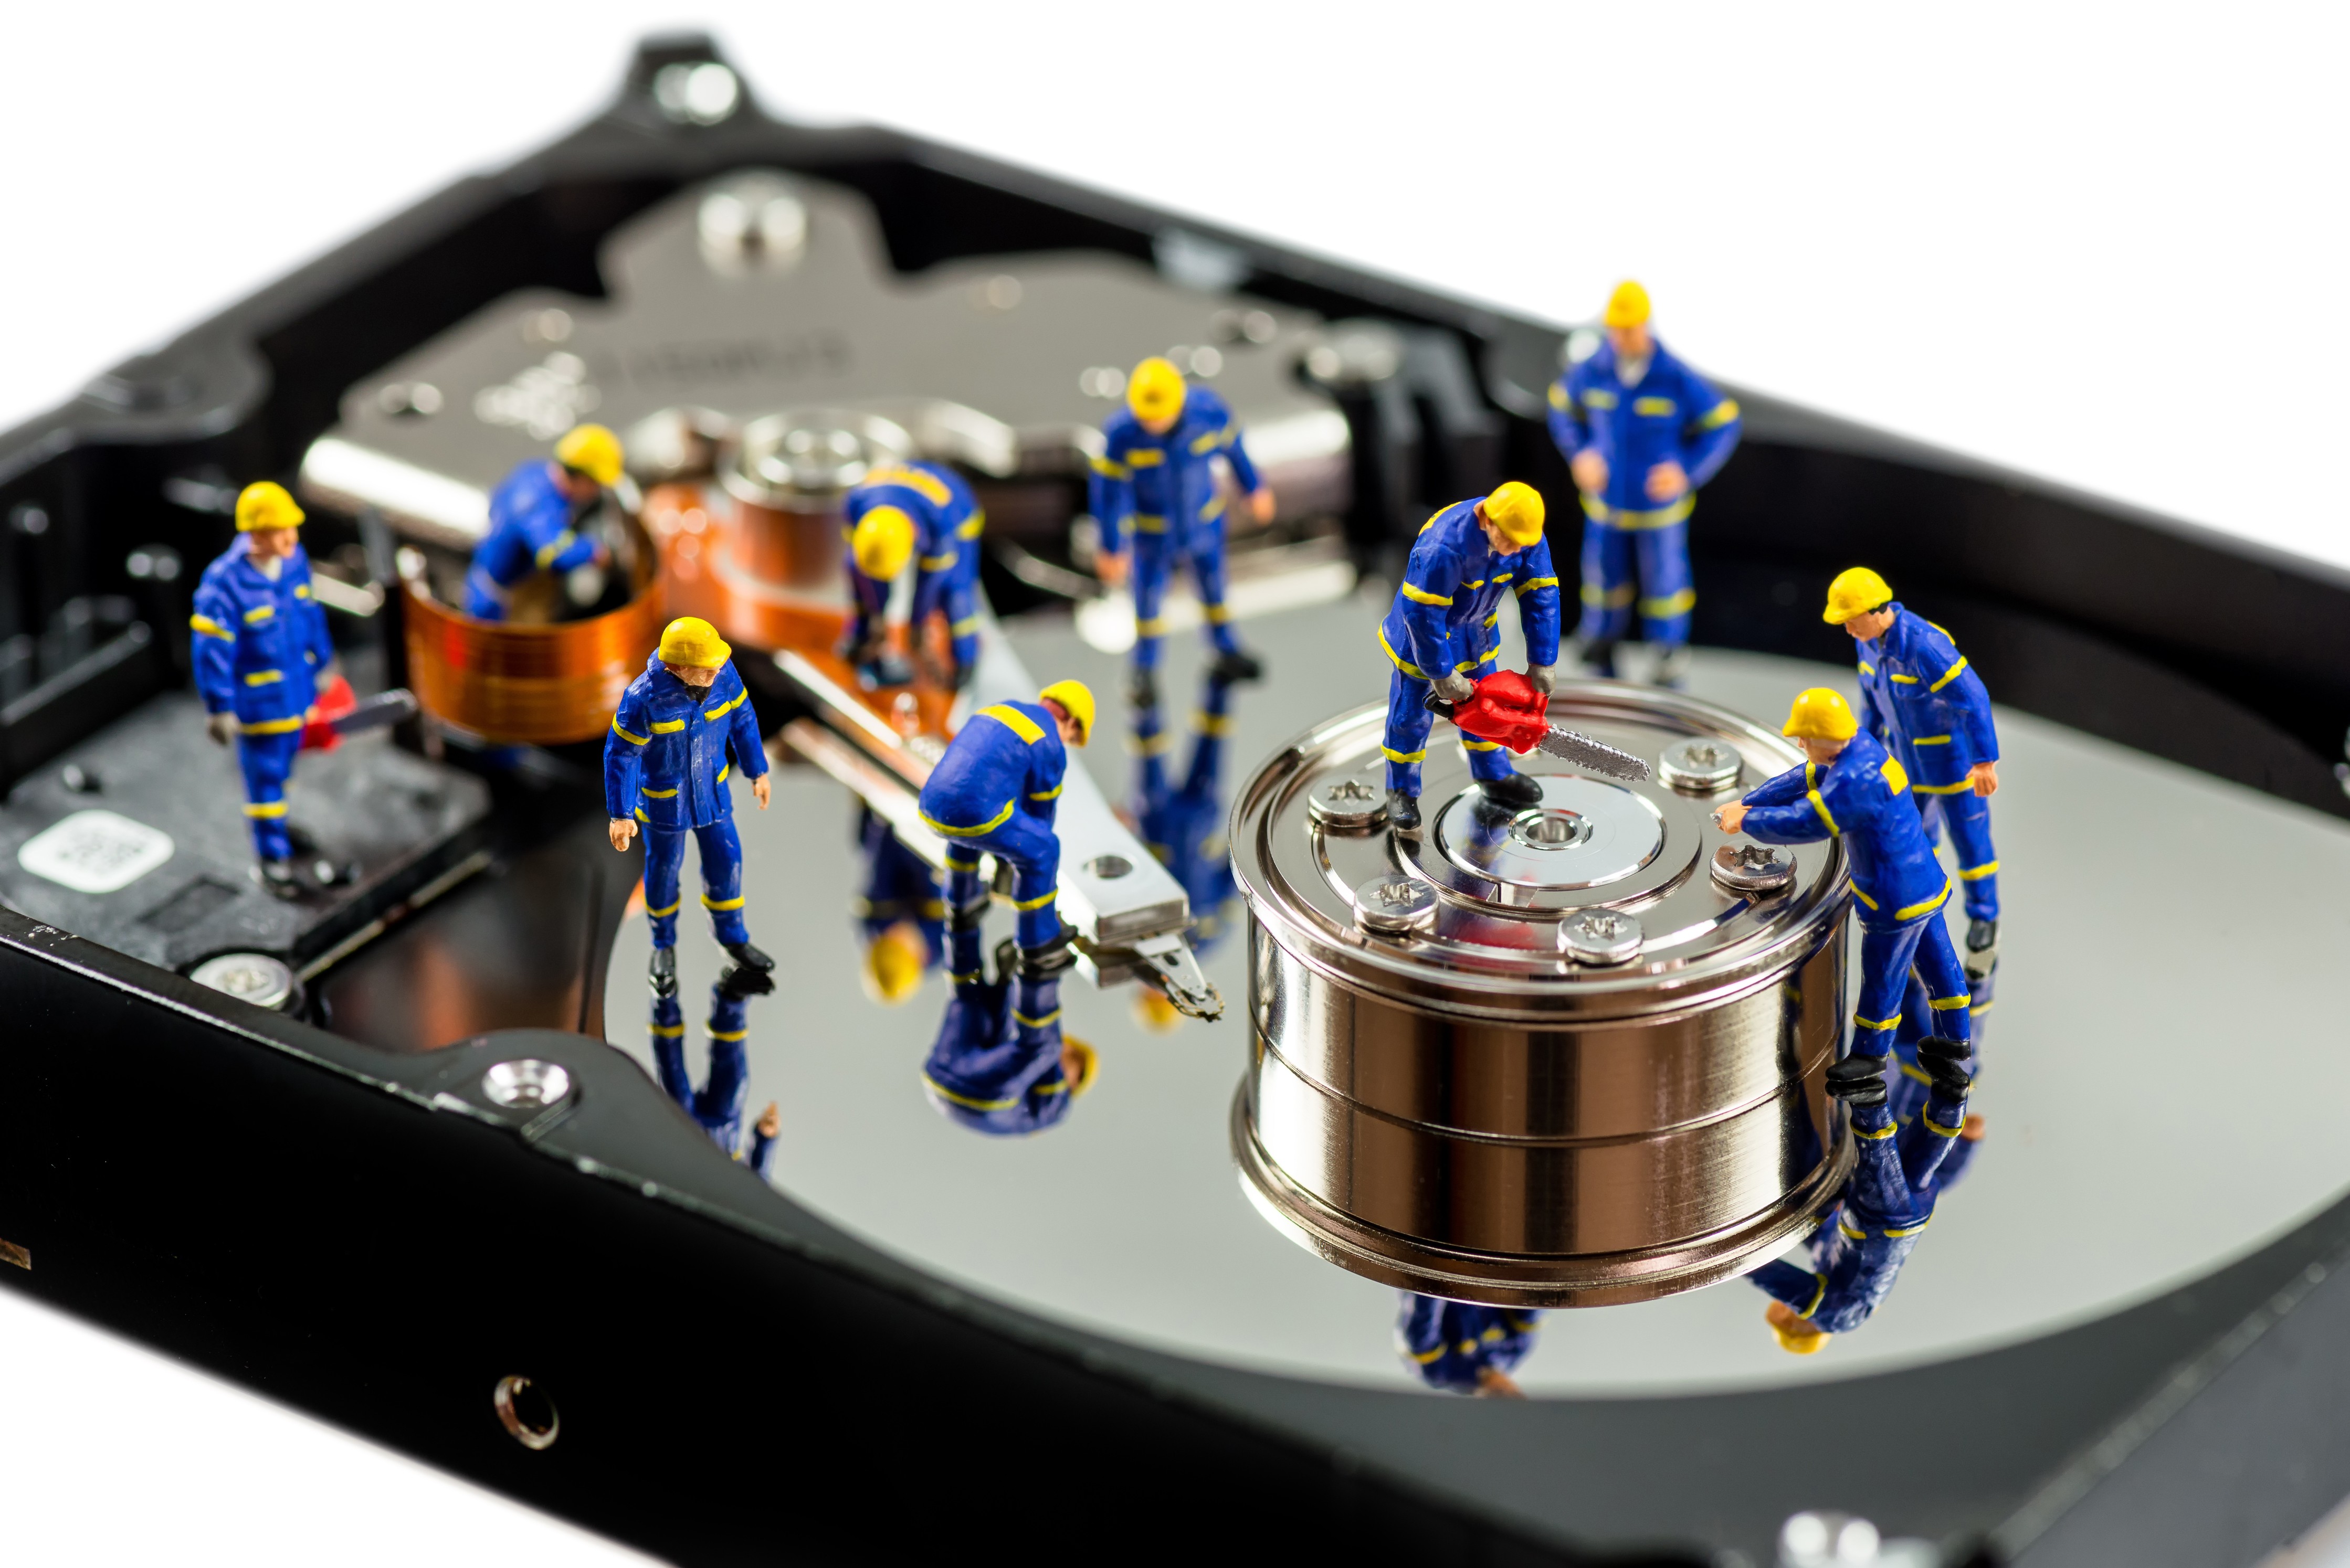 Doll Cleaning Hard Drives PCB Humor 4477x2988